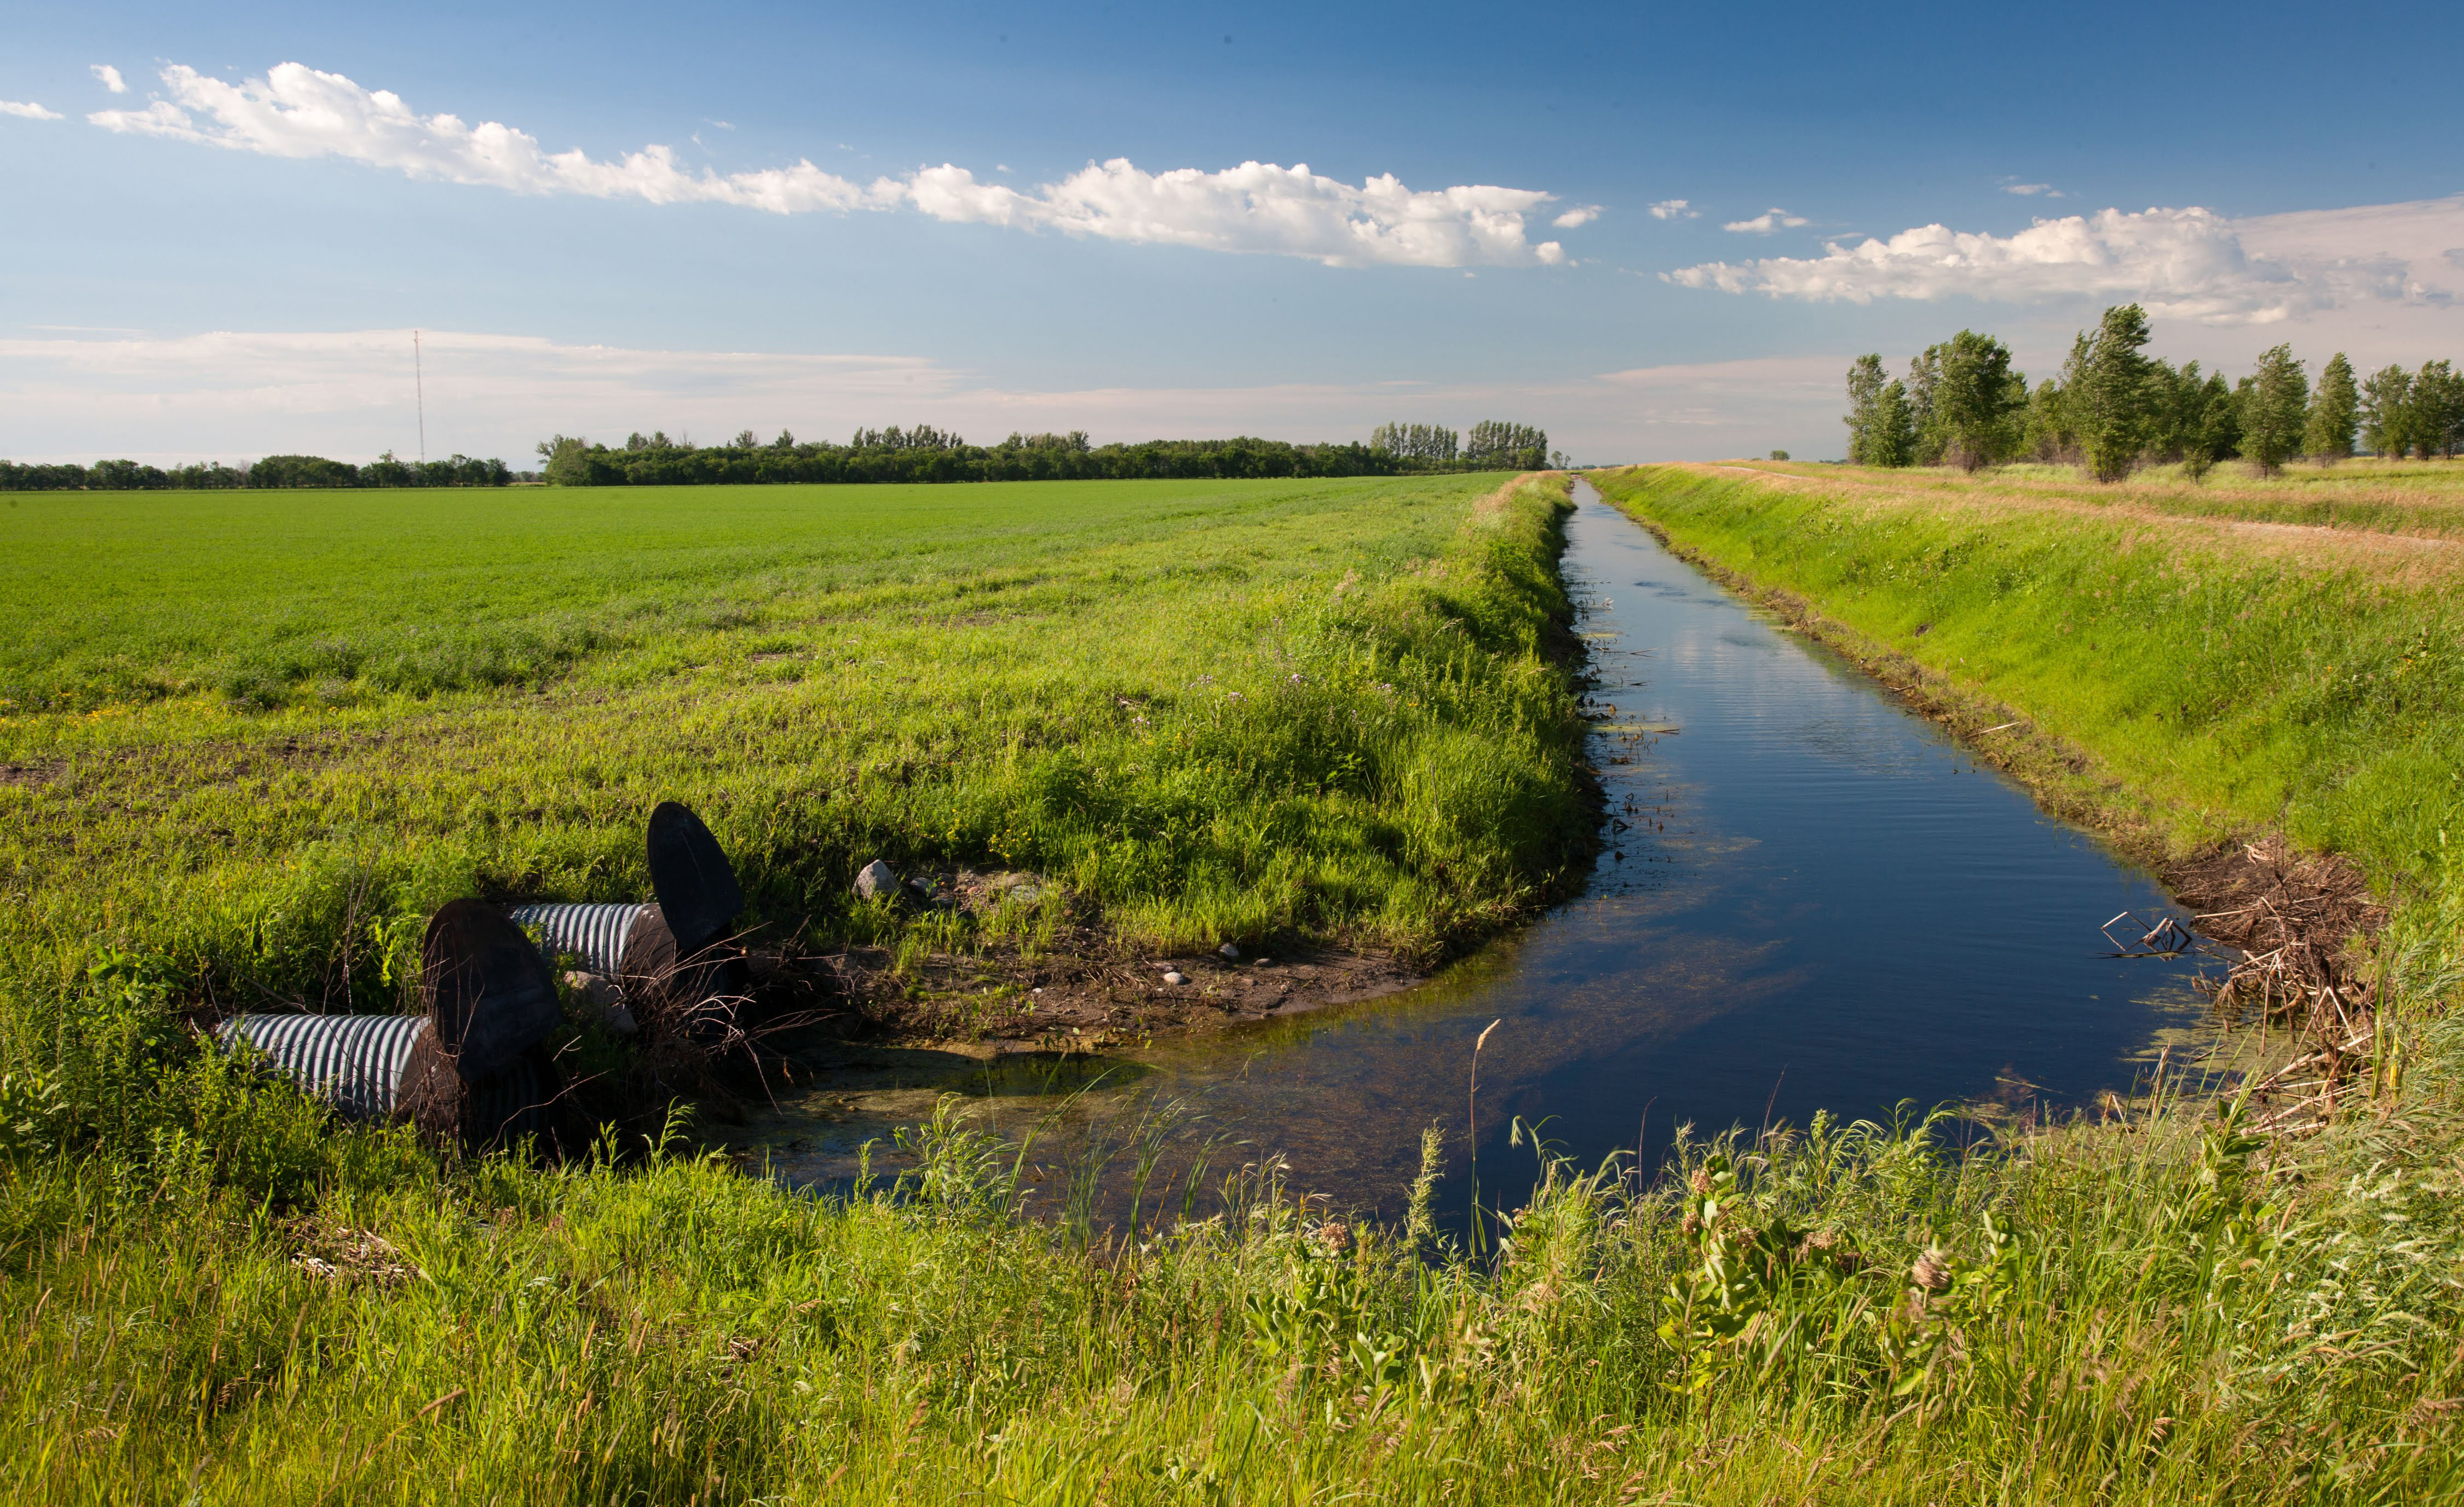 Channelized water runs along the side of a dirt road and soybean field, into two large pipes